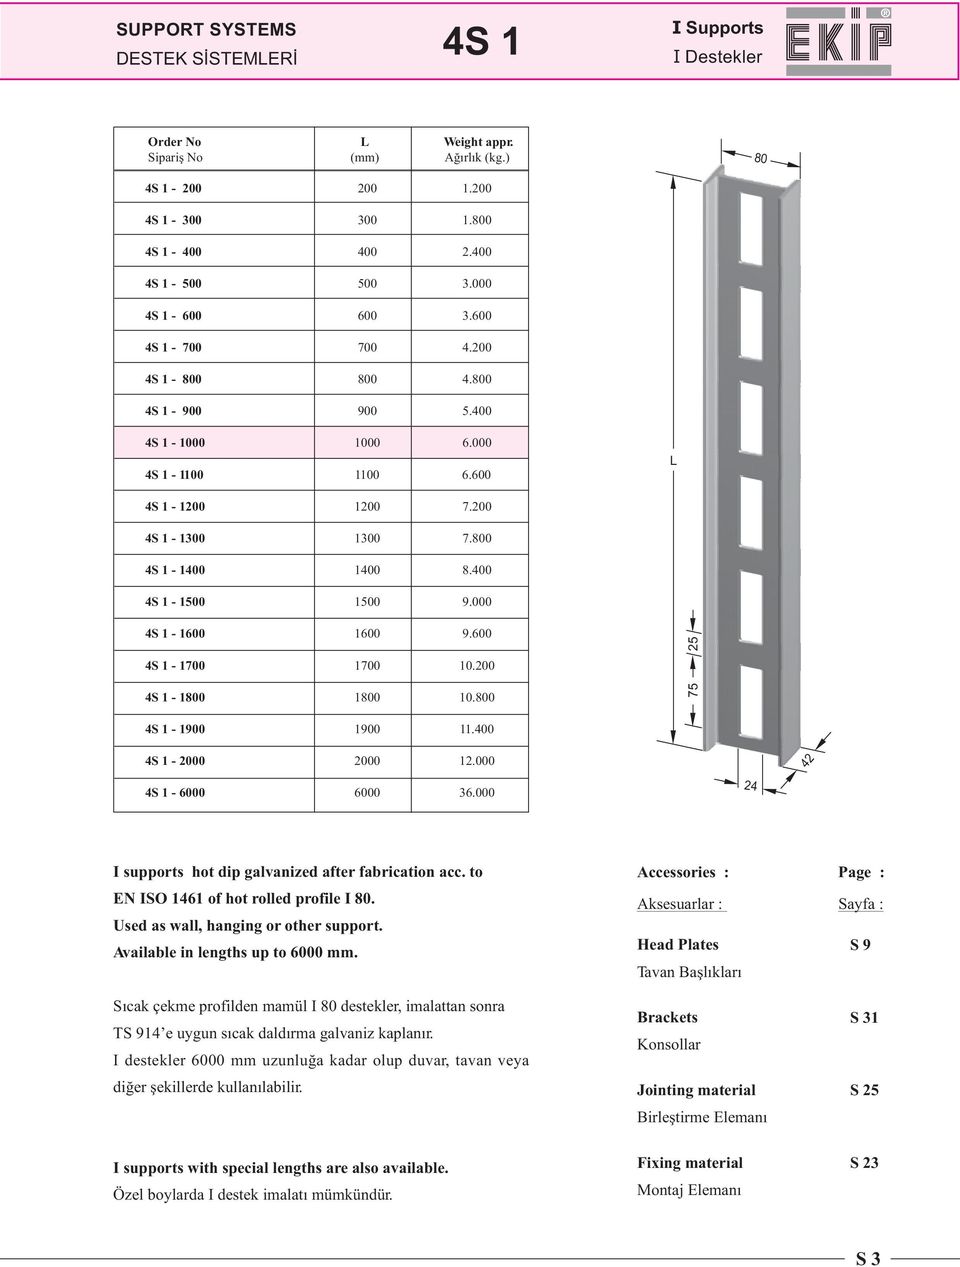 0 75 25 4S 1-1900 1900 11.0 4S 1-2000 2000 12.000 42 4S 1-6000 6000 36.000 24 I supports hot dip galvanized after fabrication acc. to EN ISO 1461 of hot rolled profile I.